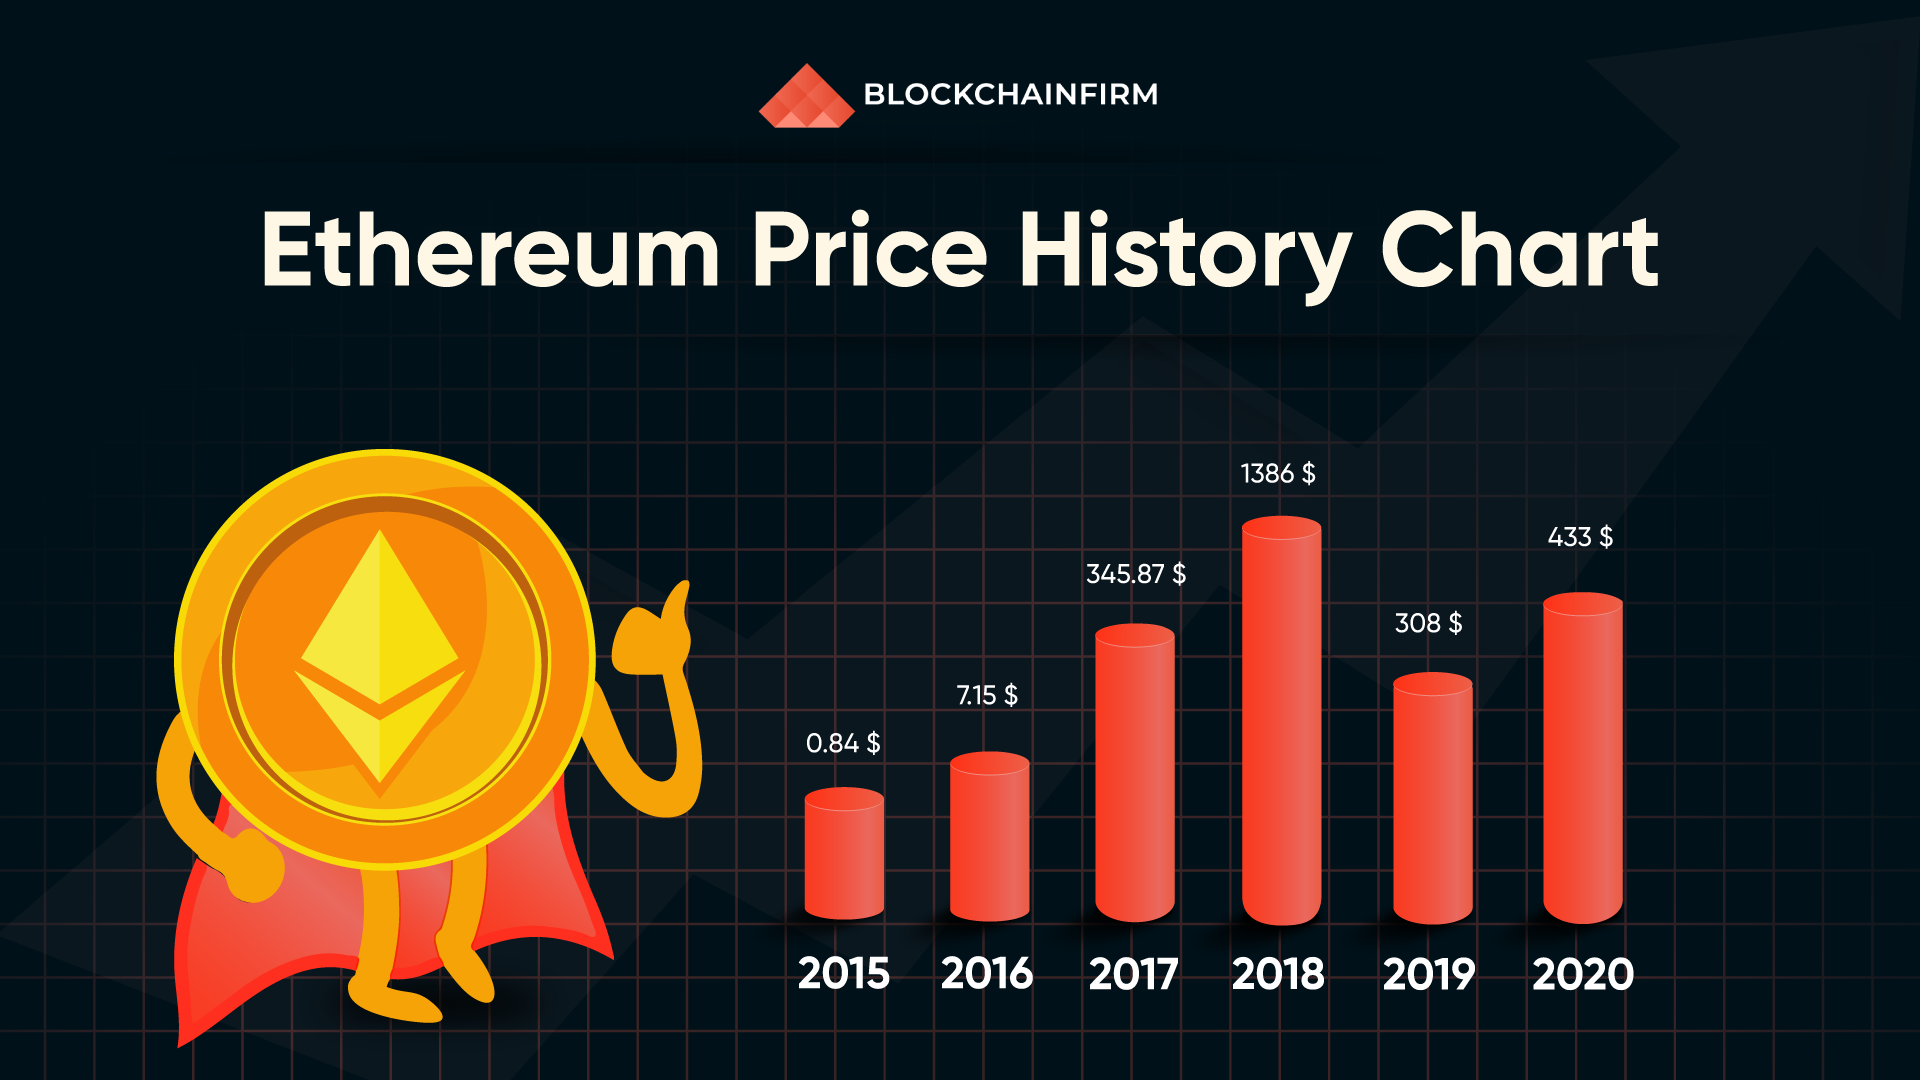 Live Ethereum Price Today [+ Historical ETH Price Data] - family-gadgets.ru